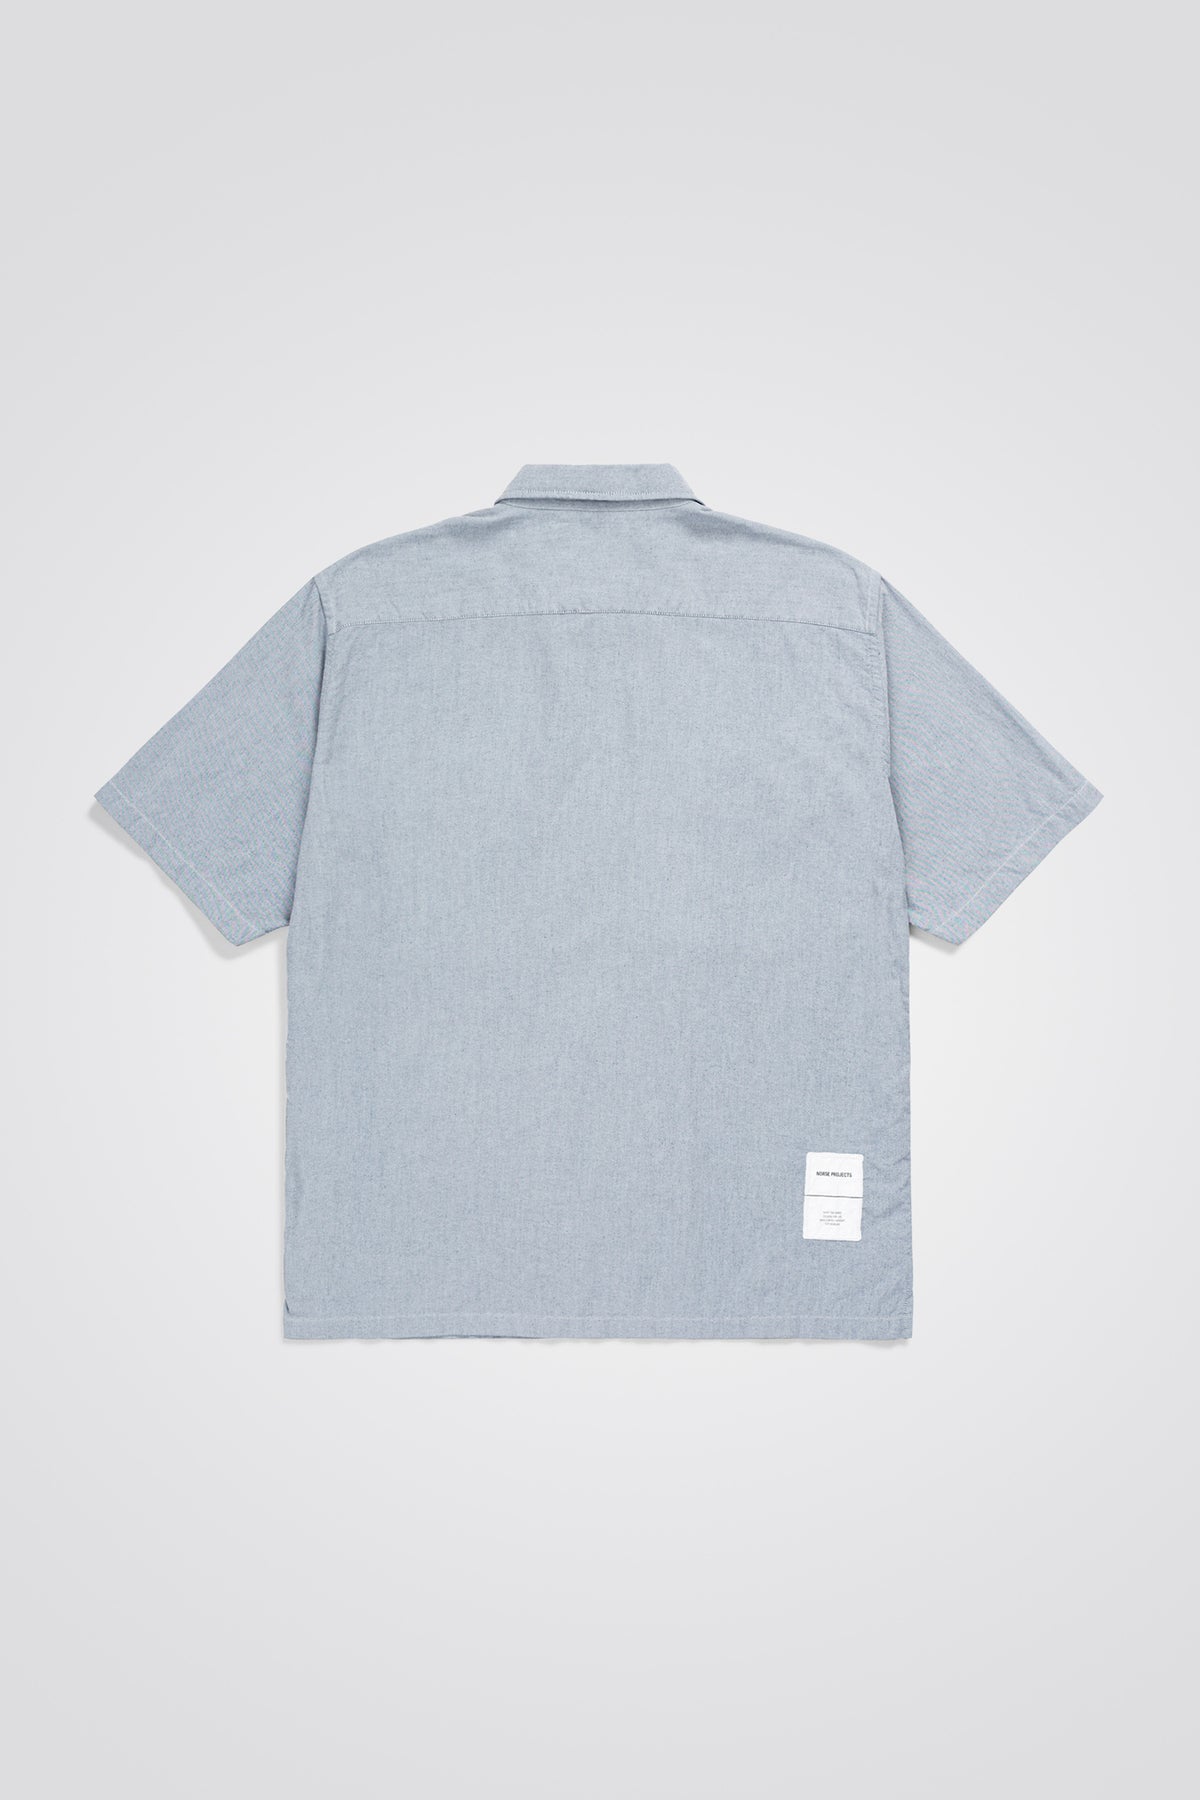 Norse Projects - Ivan Cordura Tab Series - Navy – Haven Surf